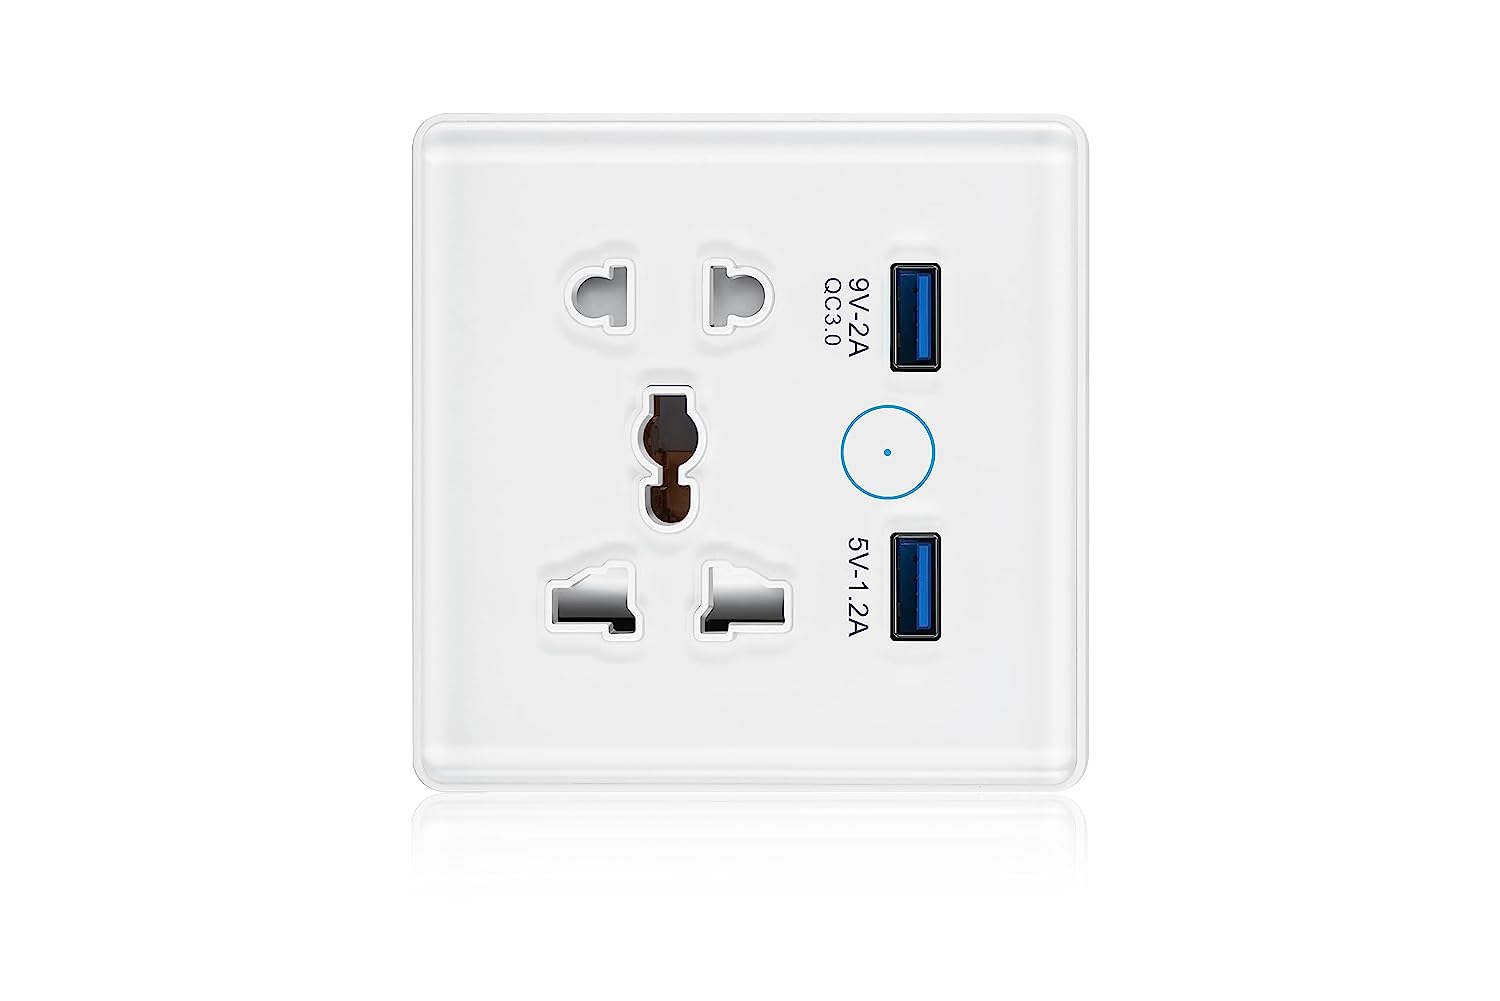 Athom UK Smart Wall Outlet（5 Hole+ 2 USB),Works with Apple Homekit, Siri Voice Control, Timer Function